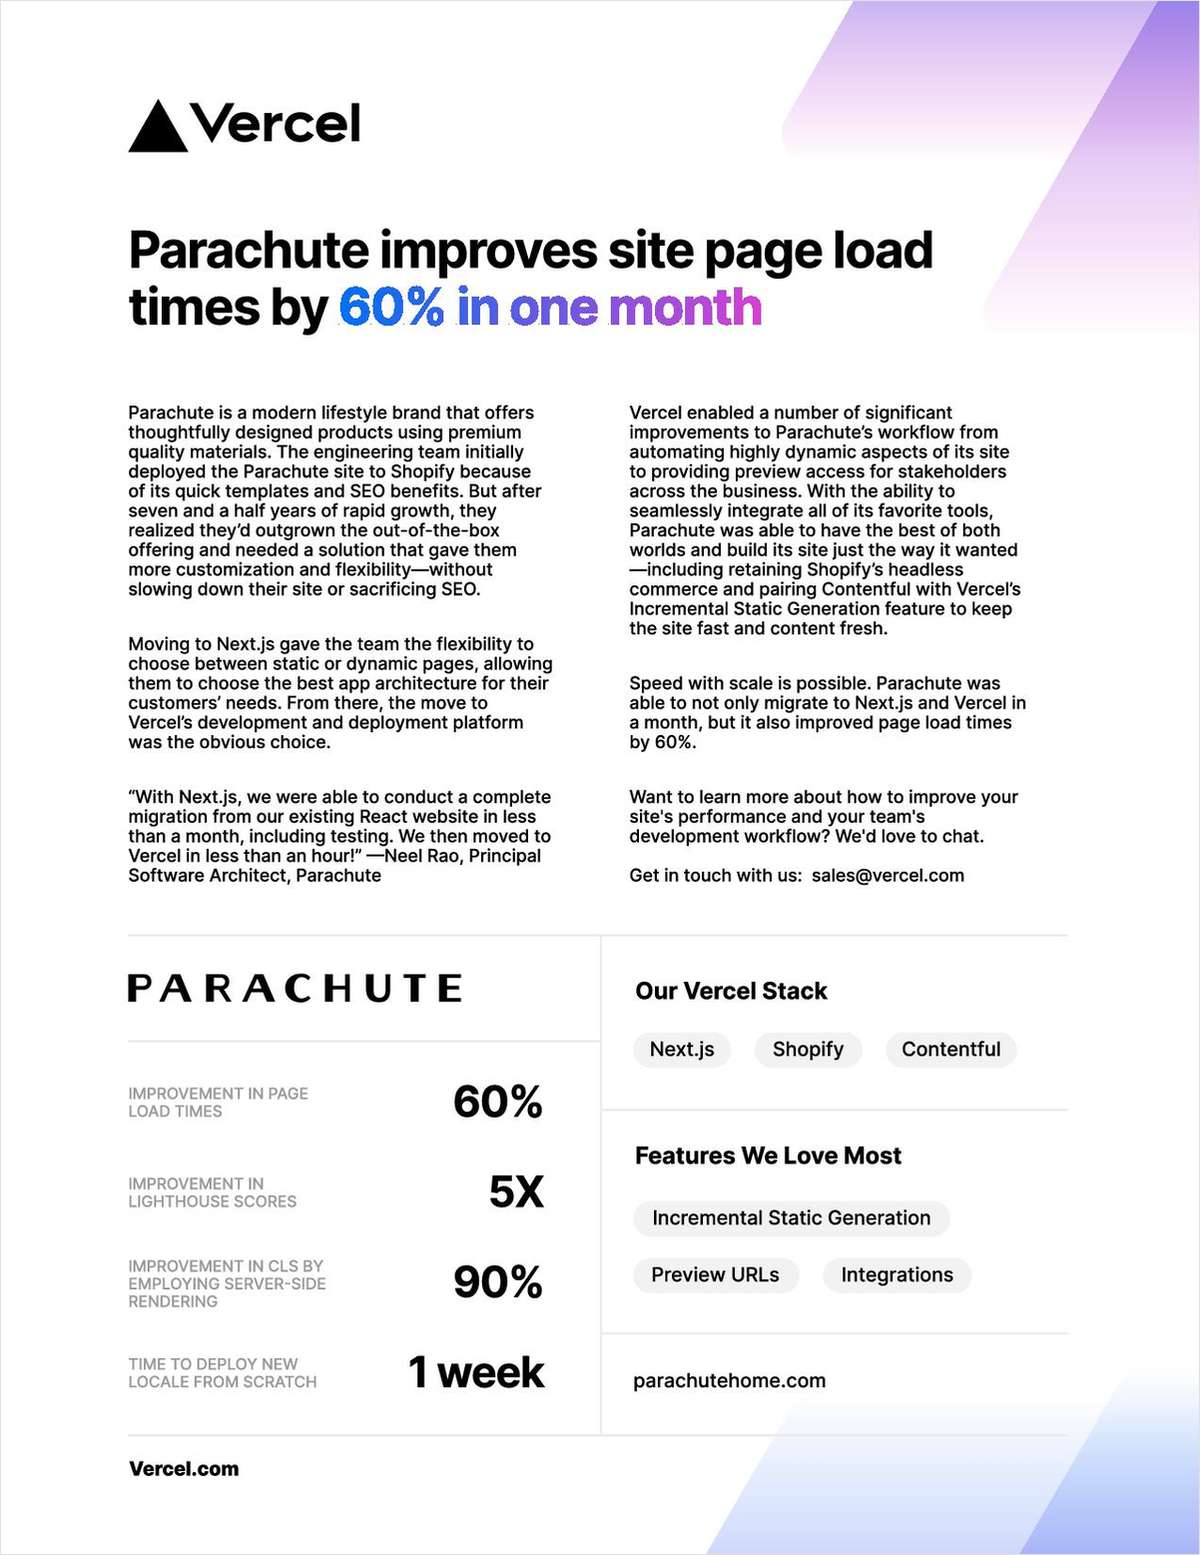 Parachute Improves Site Page Load Times by 60% in One Month